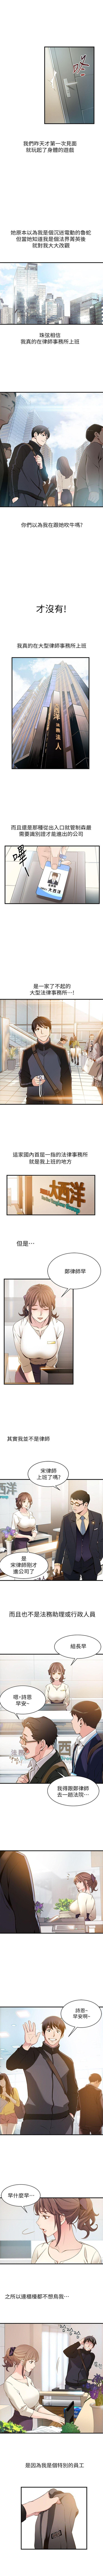 Wanking 弱點 1-101 官方中文（連載中） Chastity - Page 4